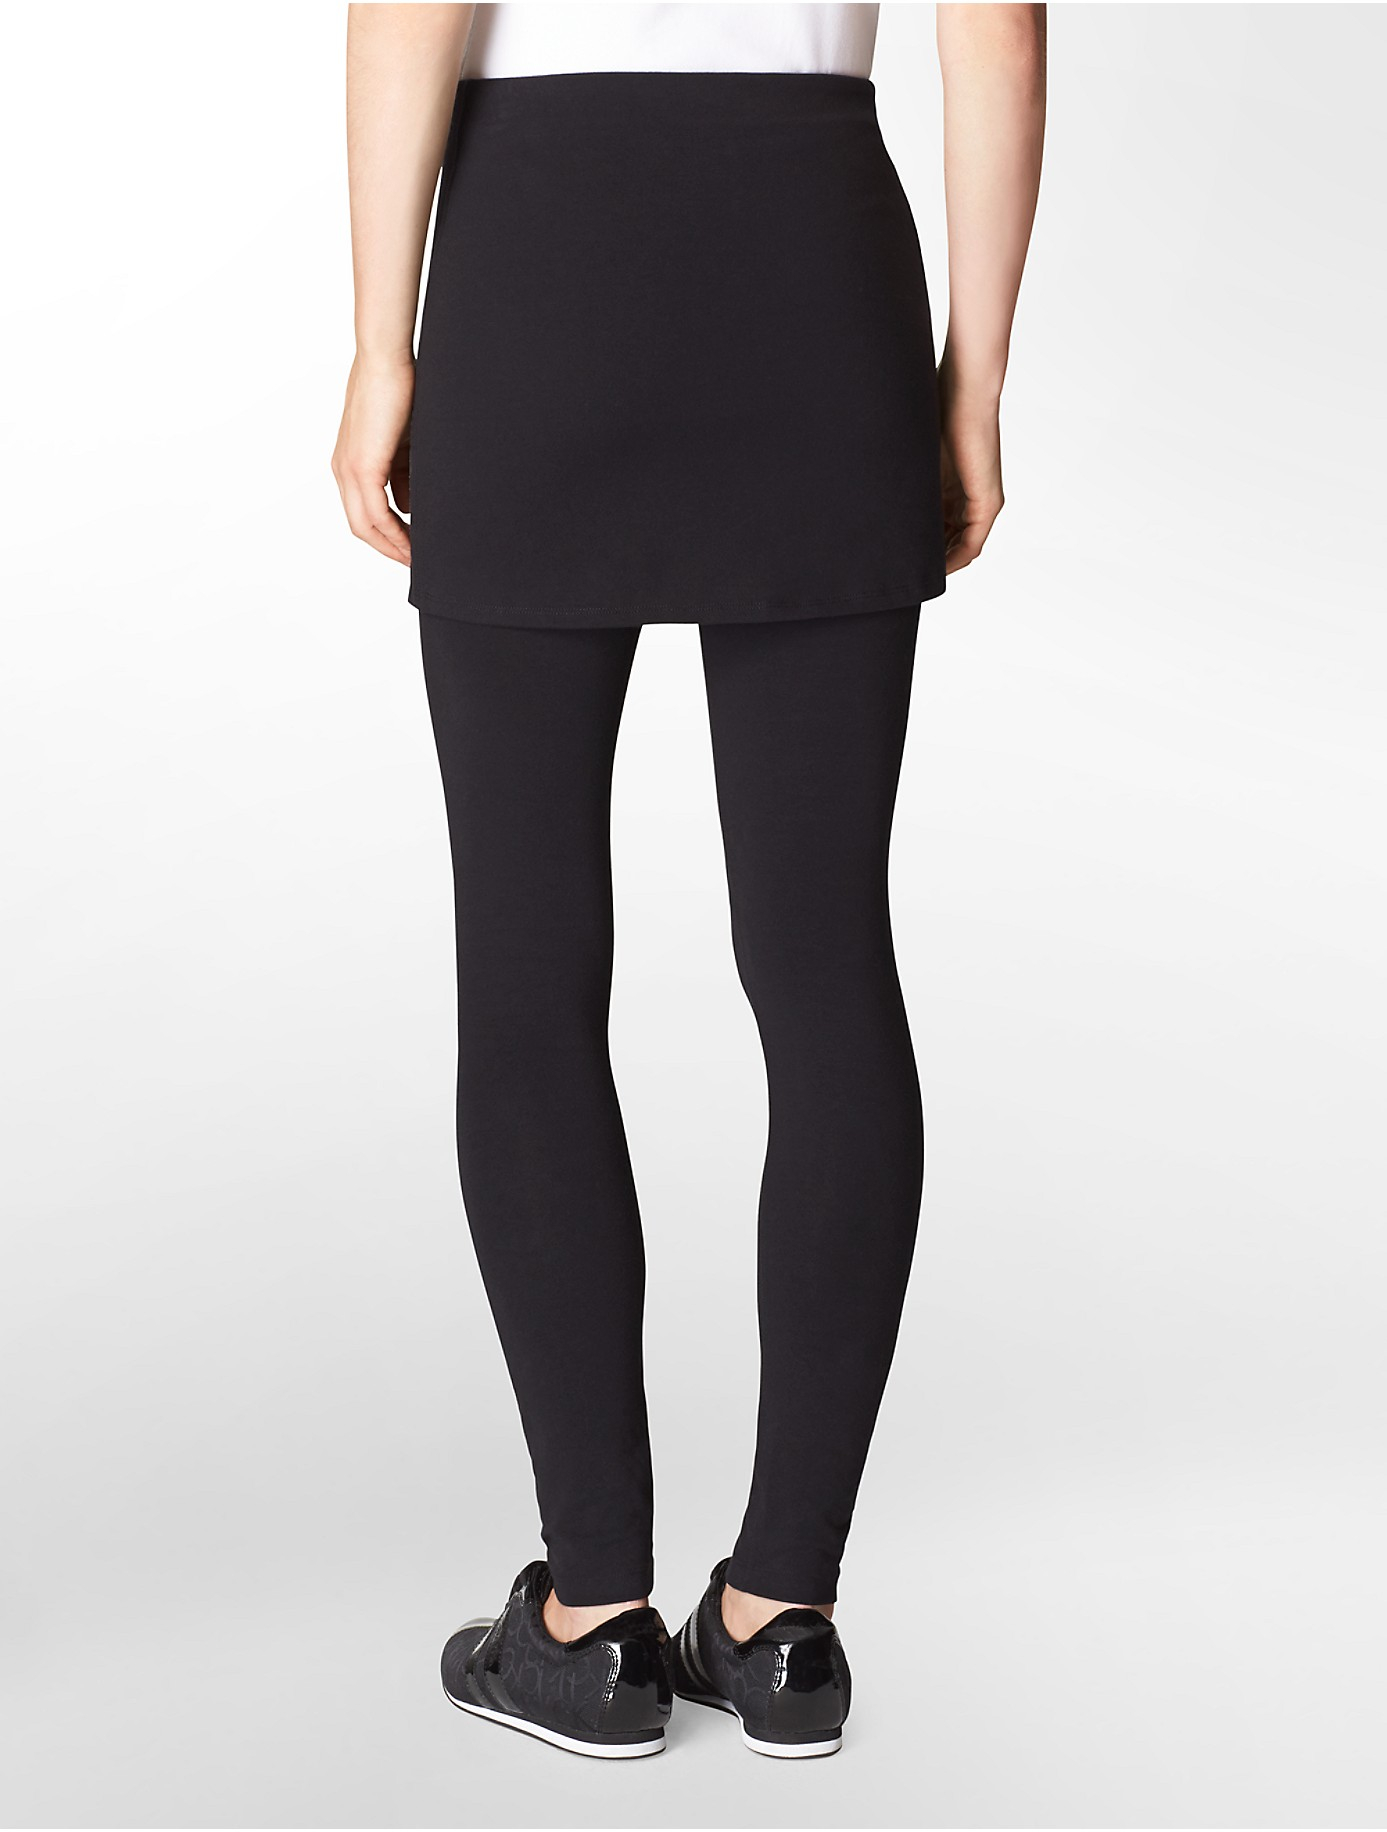 Calvin Klein two piece(legging and top)-Black - Sefbuy